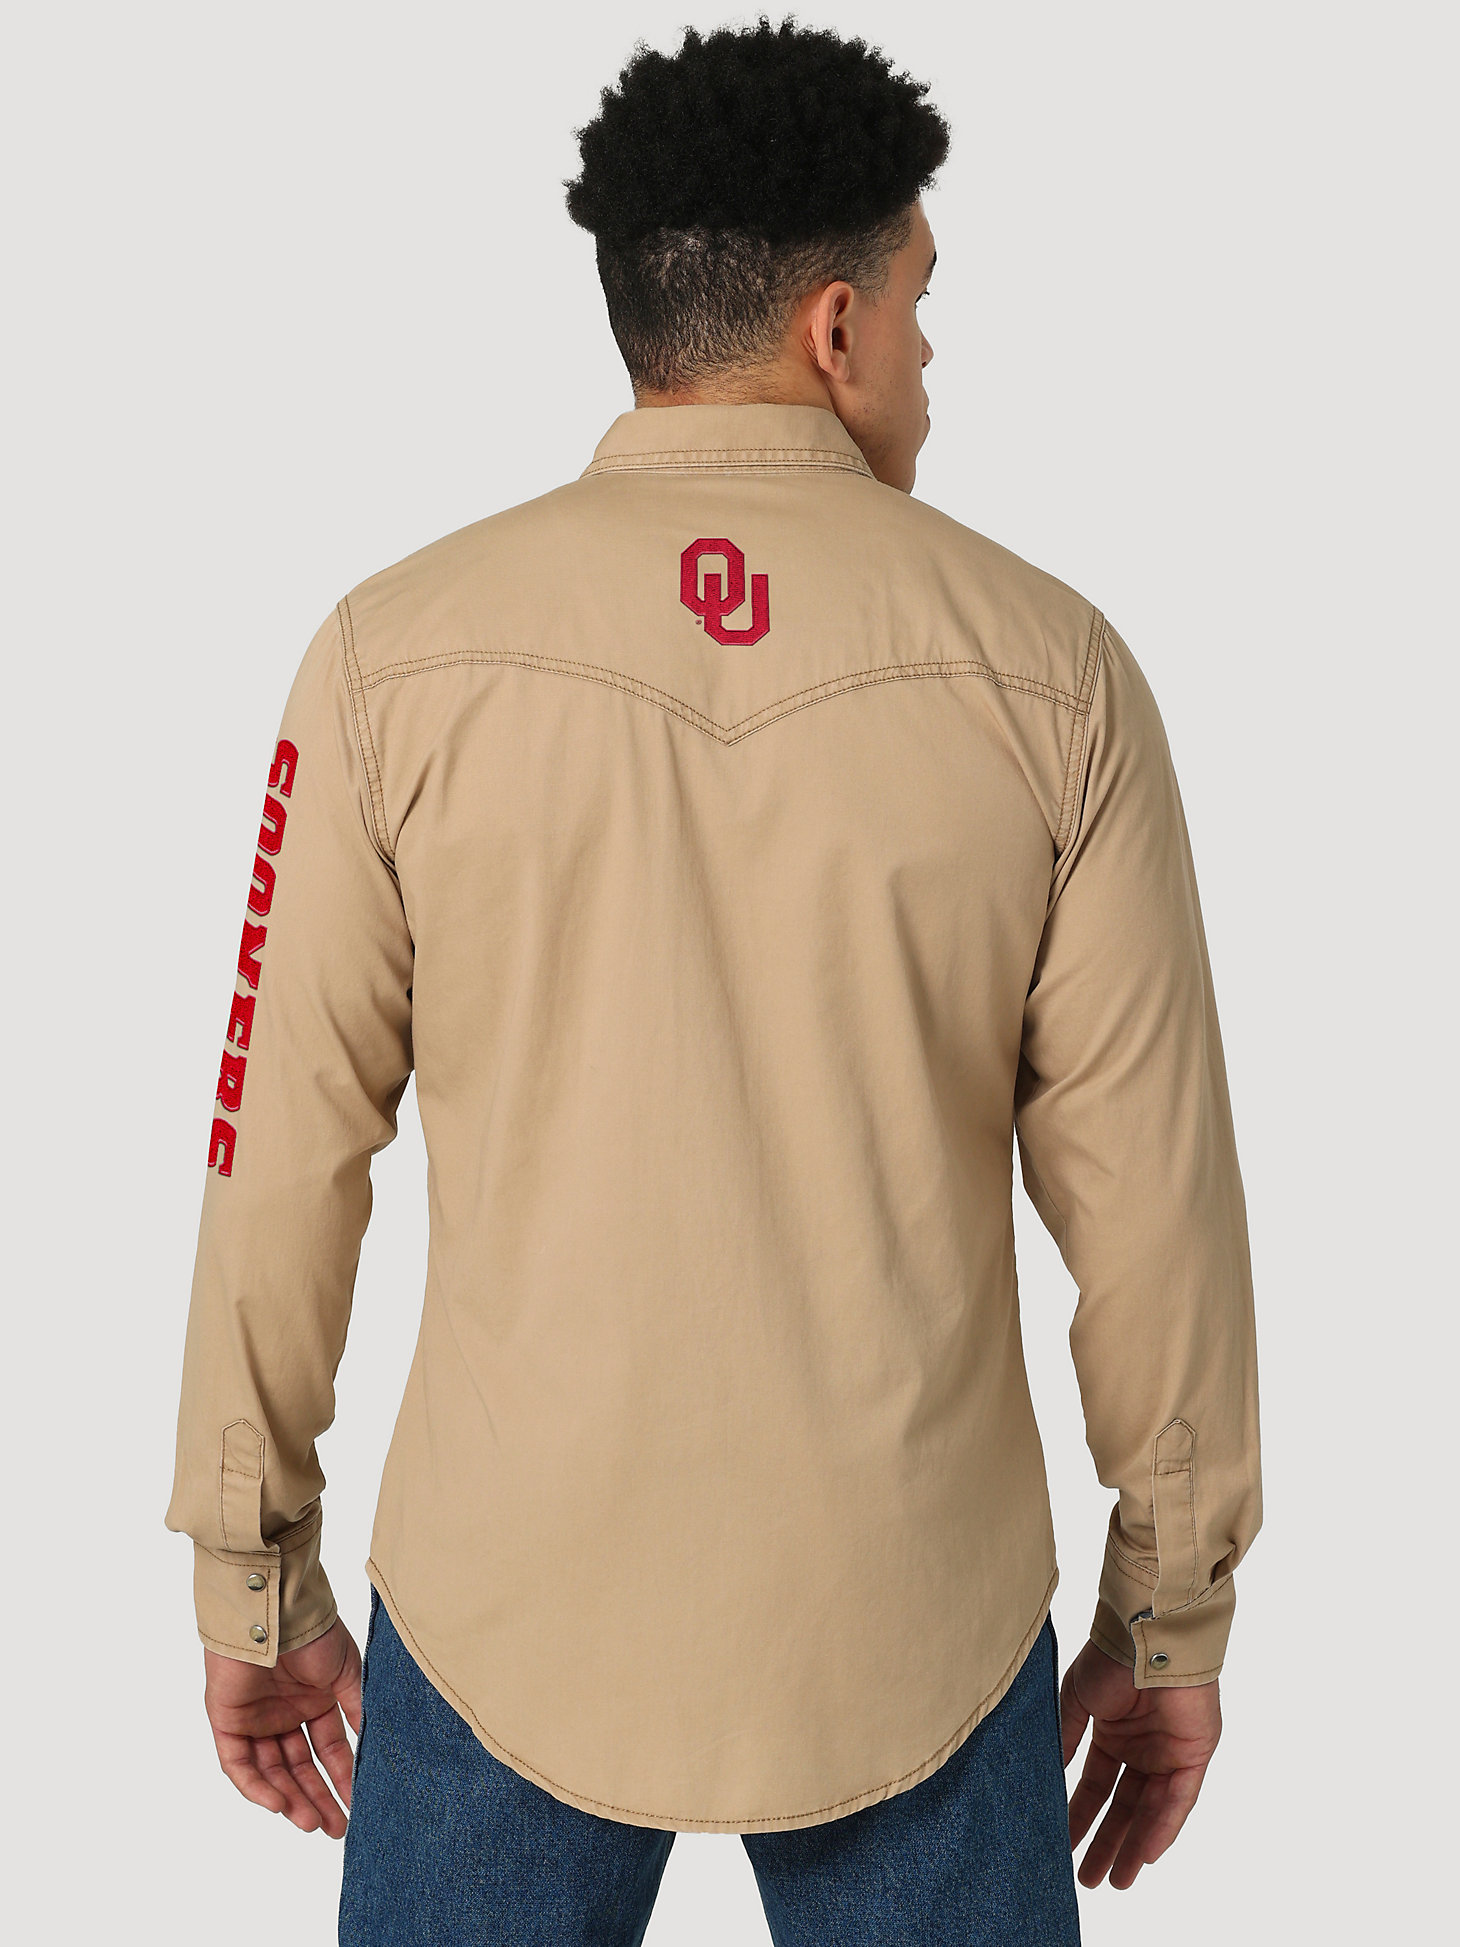 Wrangler Collegiate Embroidered Twill Western Snap Shirt in University of Oklahoma alternative view 1